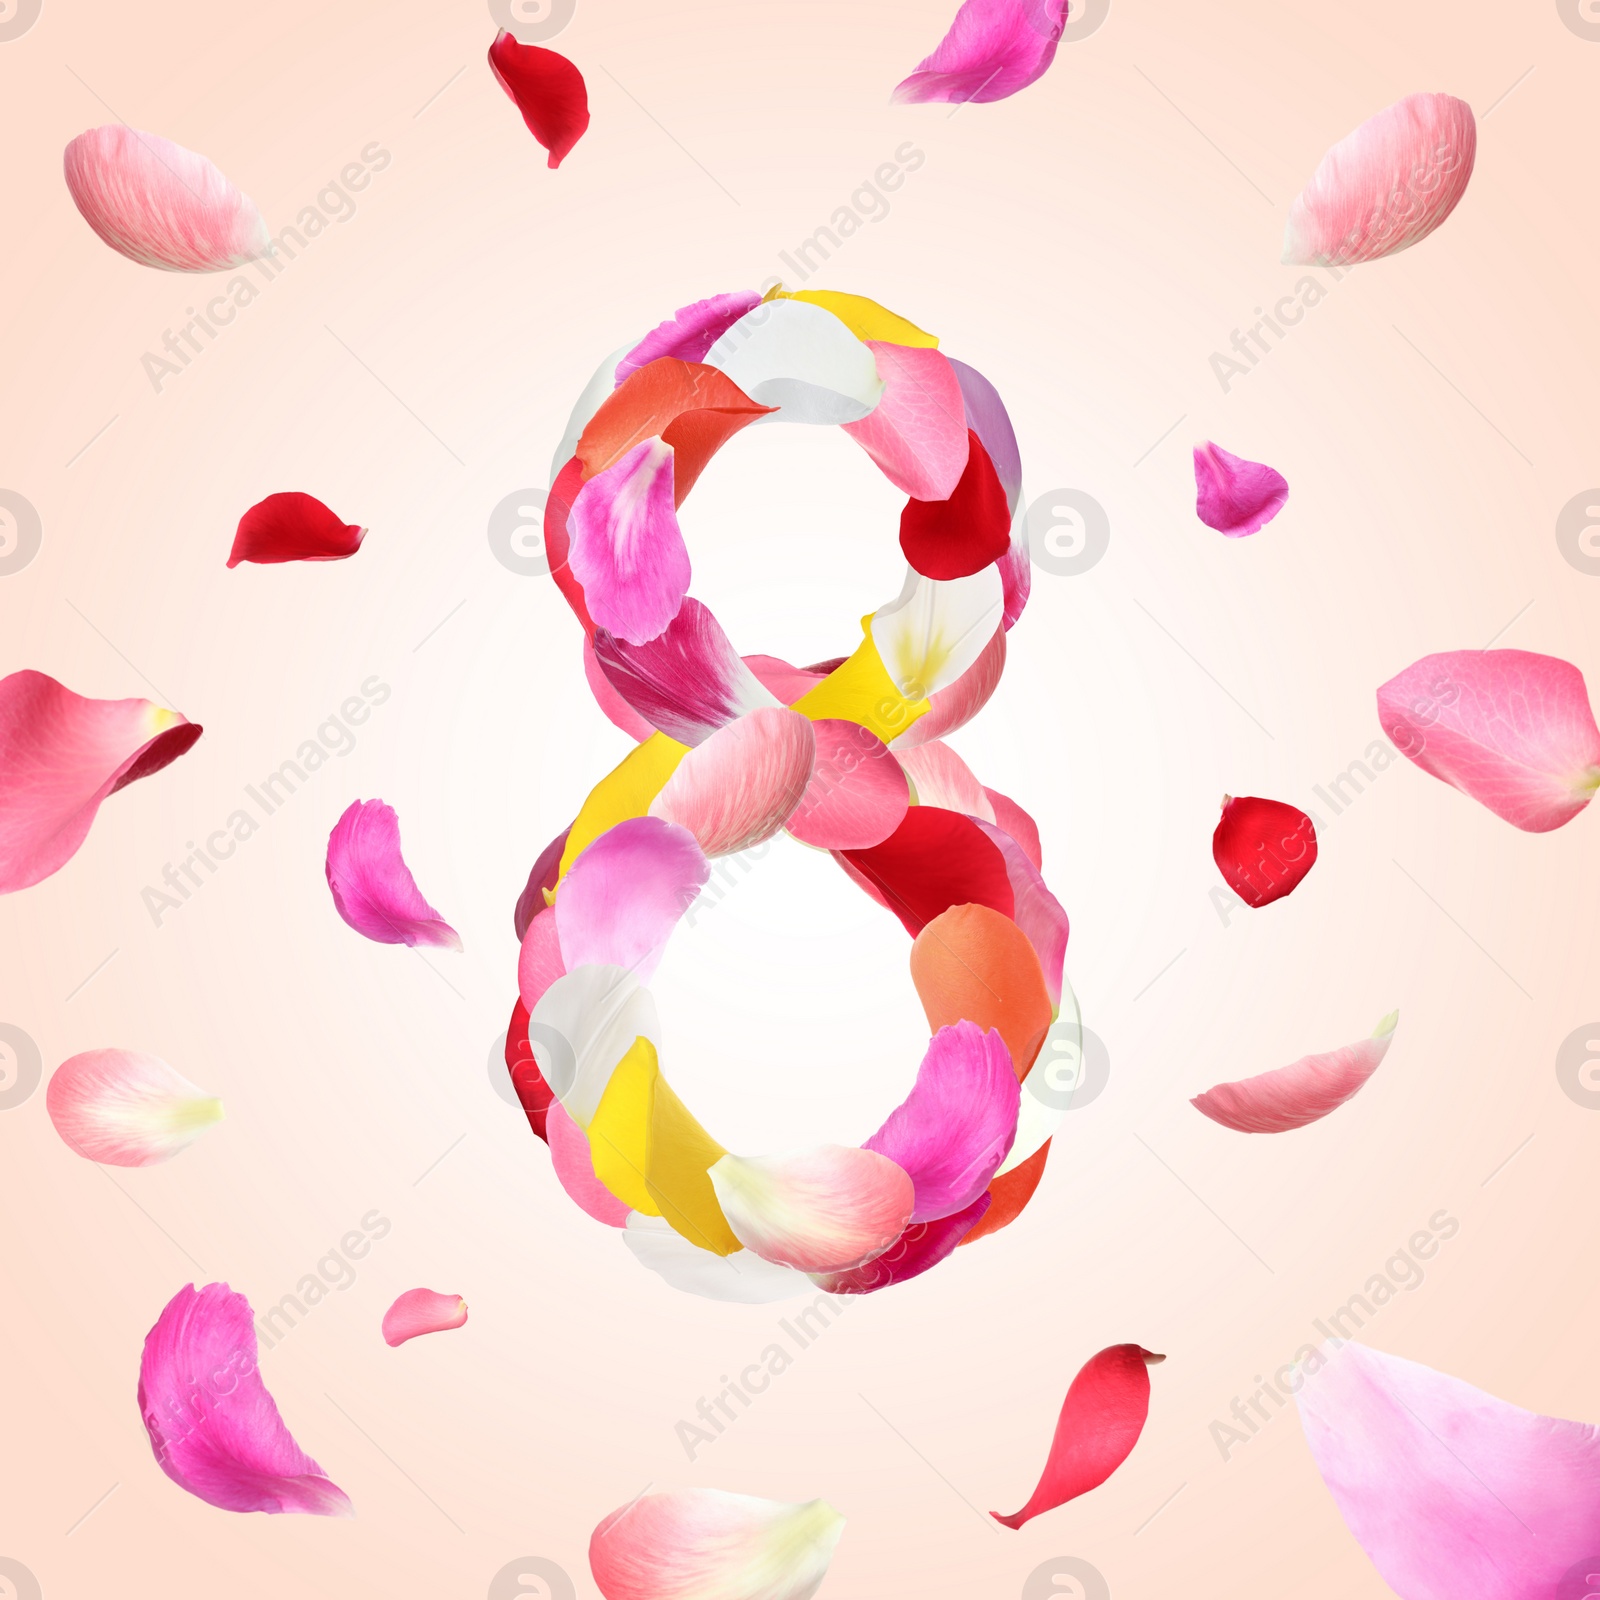 Image of International Women's Day - March 8. Card design with number 8 of bright flower petals on peach color background